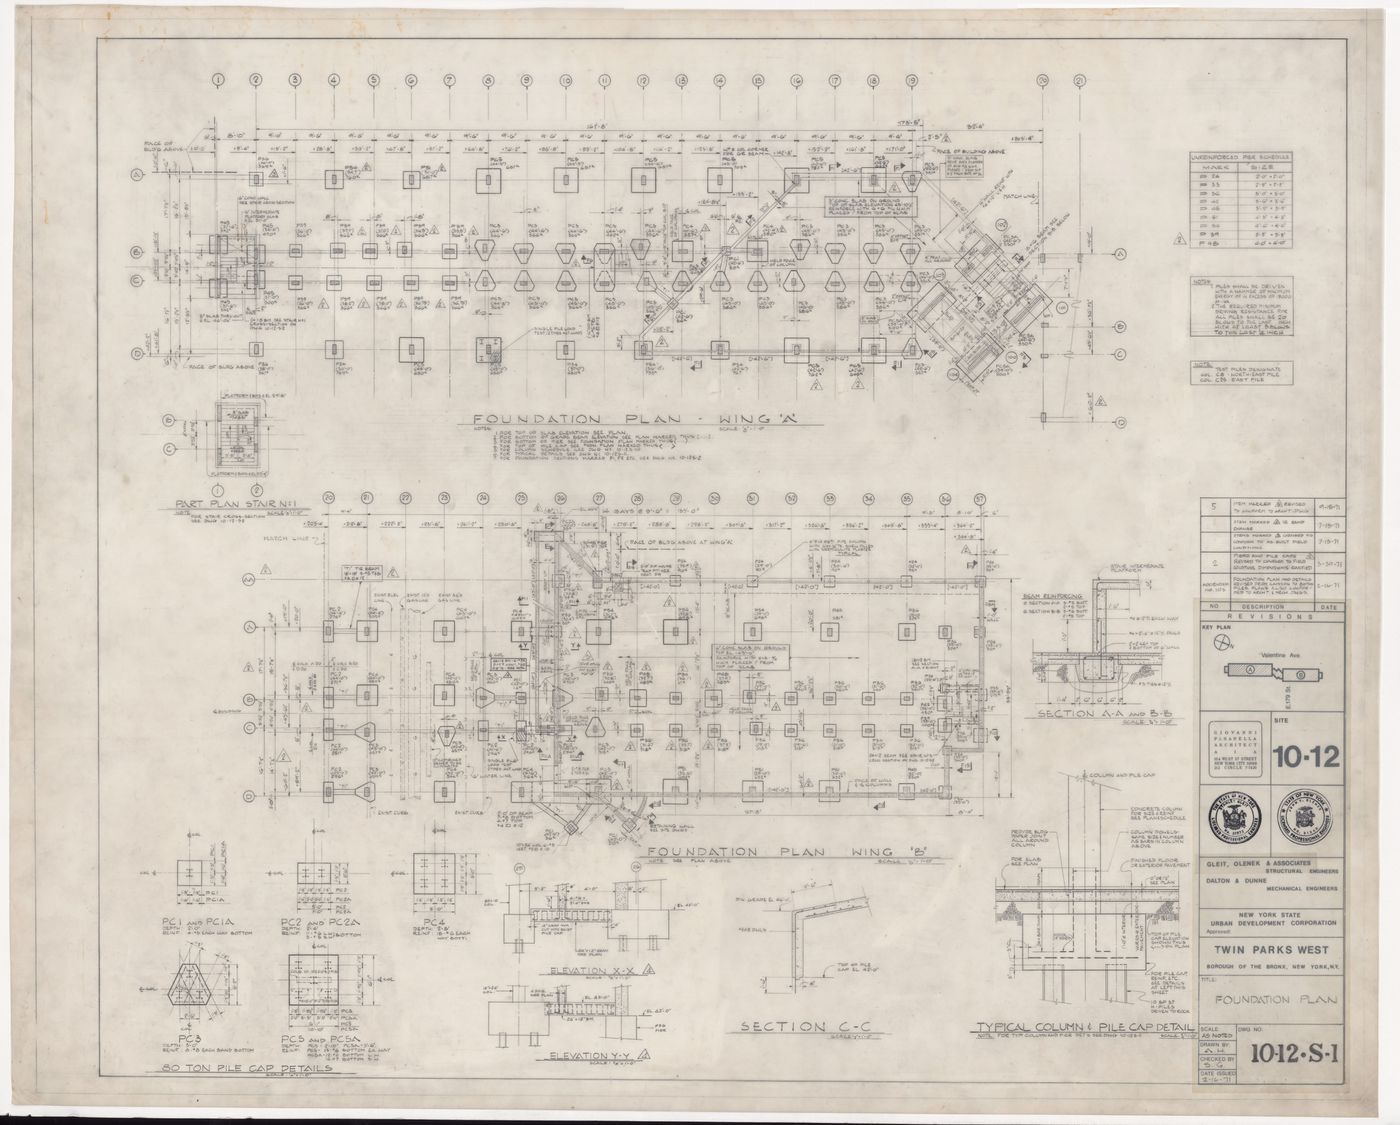 Foundation plans and details for Twin Parks West, Site 10-12, Bronx, New York